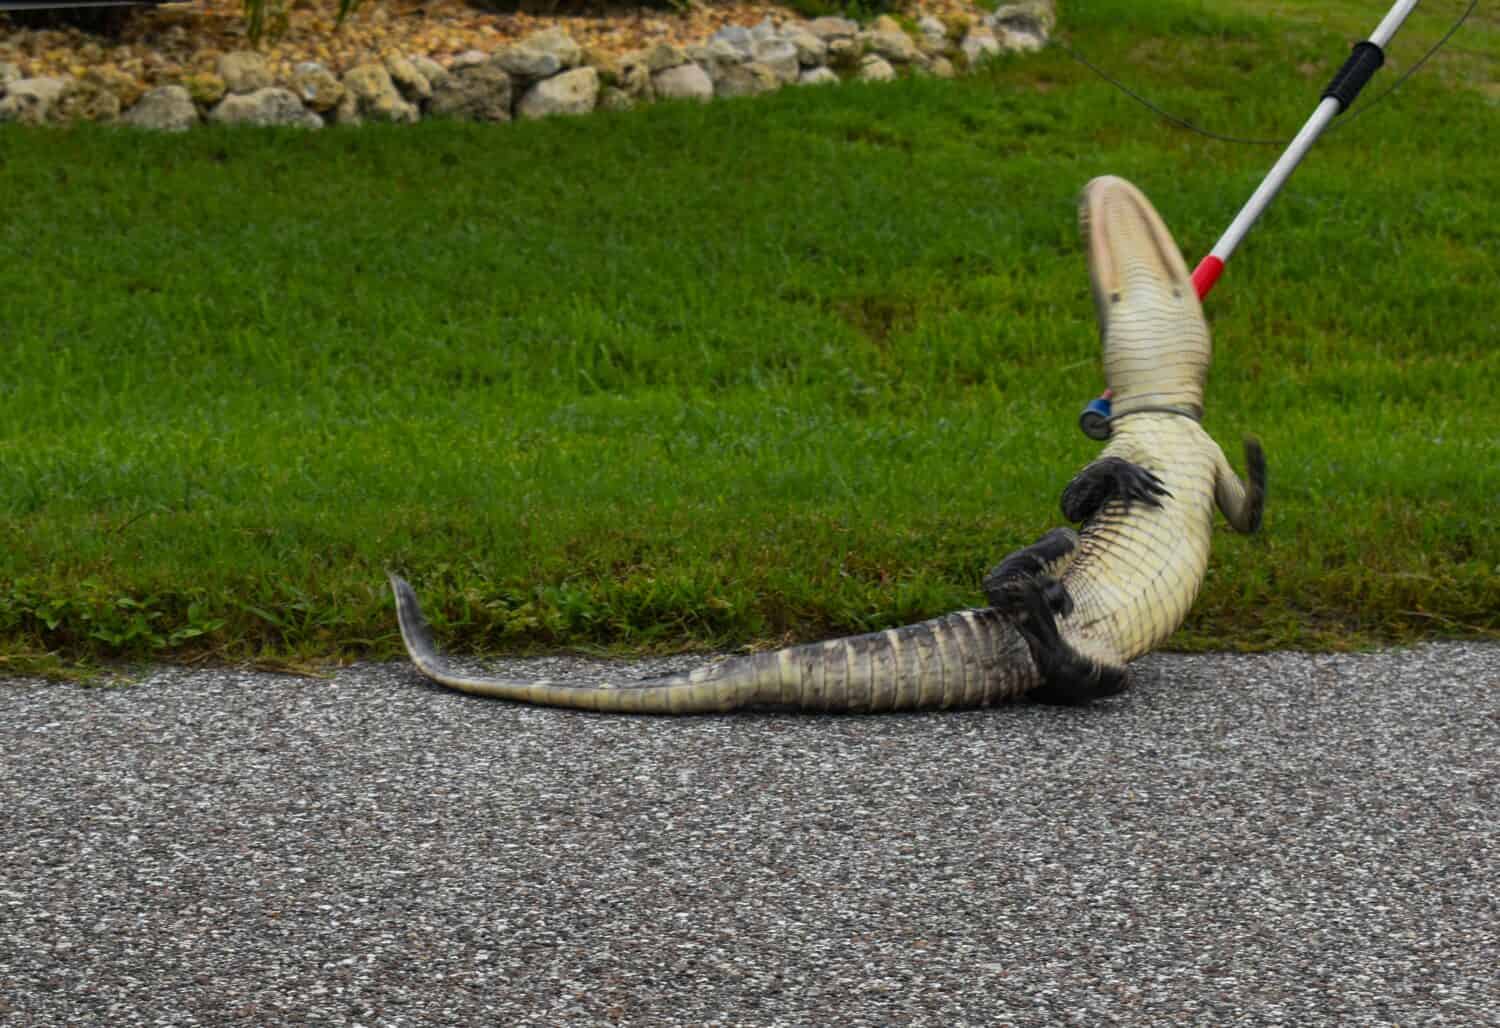 A juvenile alligator tries to spin out of a noose